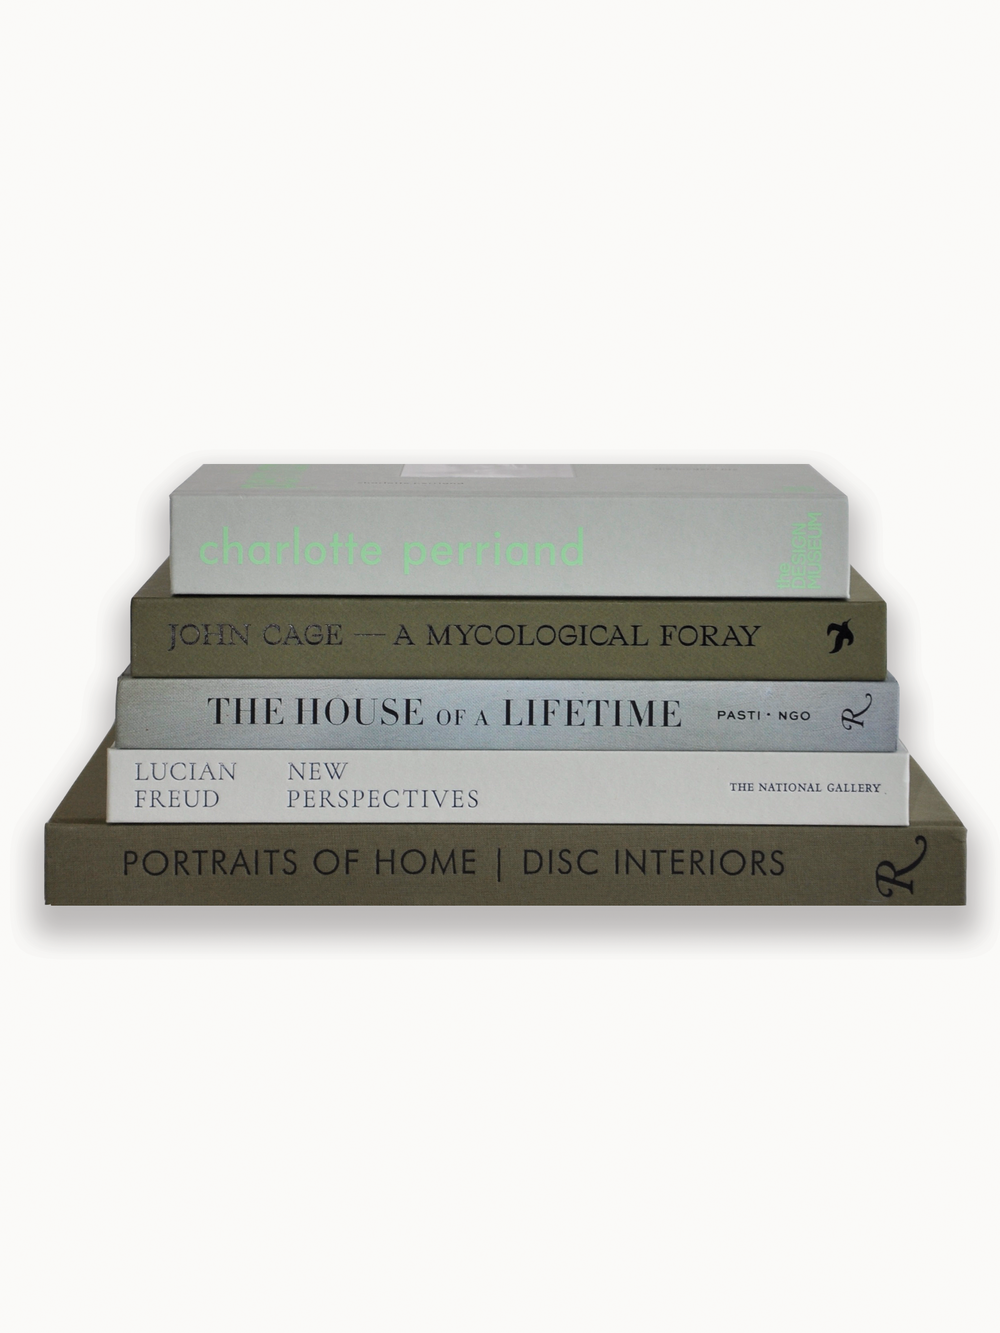 The Green Book Stack - Green Coffee Table Books For Staging & Home Decor —  Maison Plage